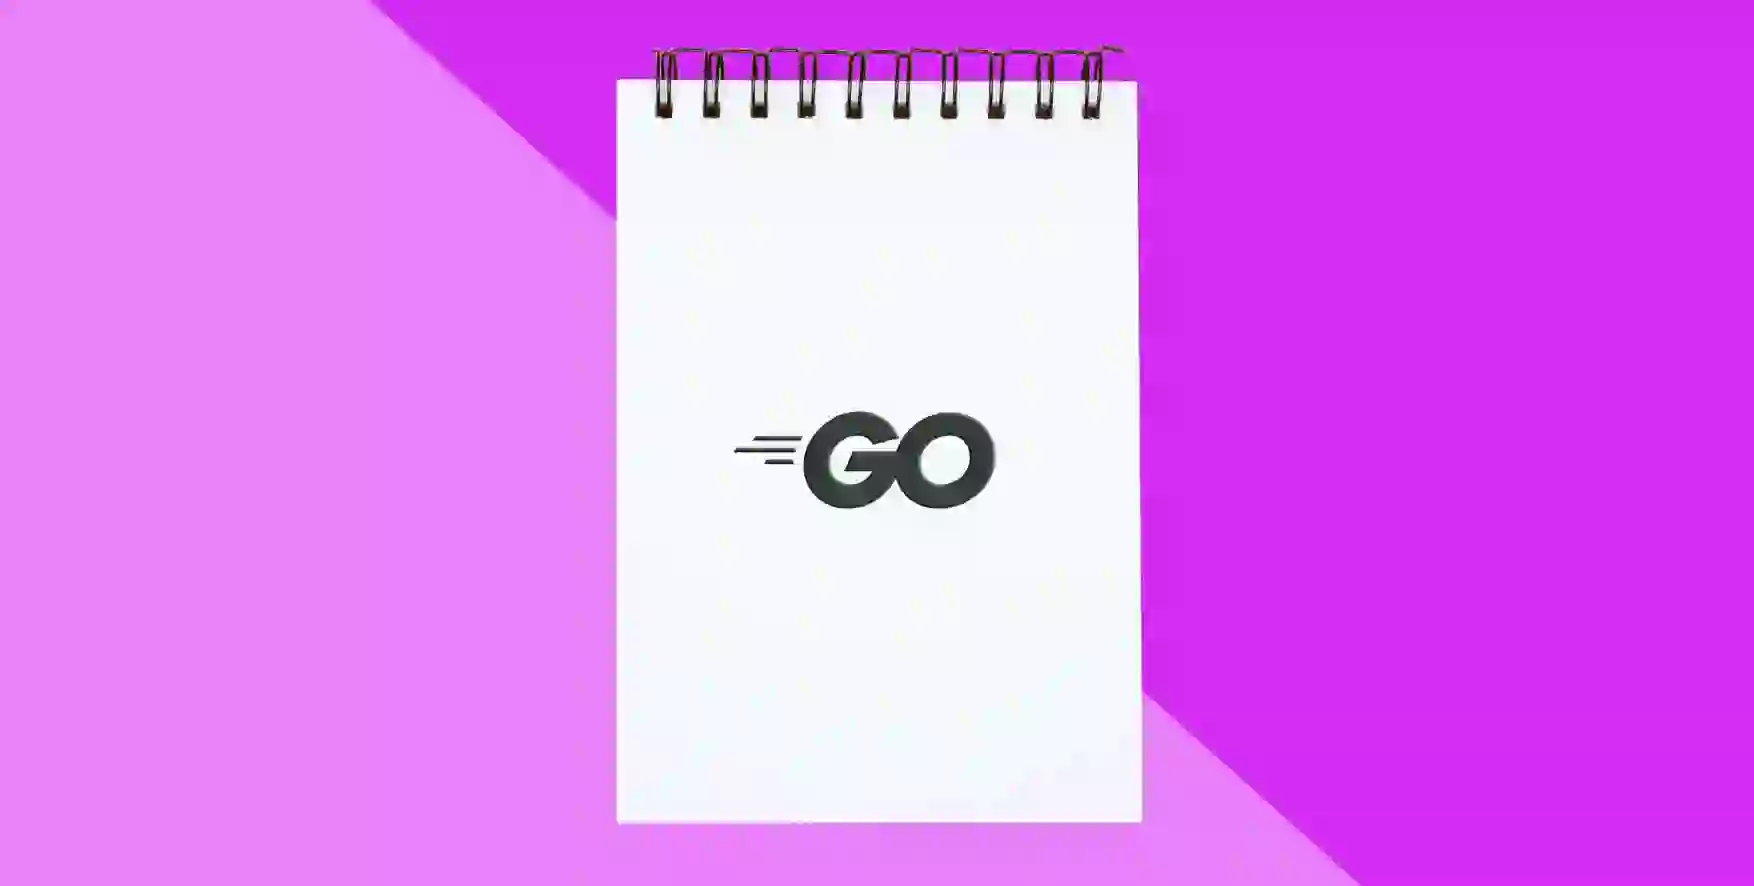 Go symbol on a piece of notepad